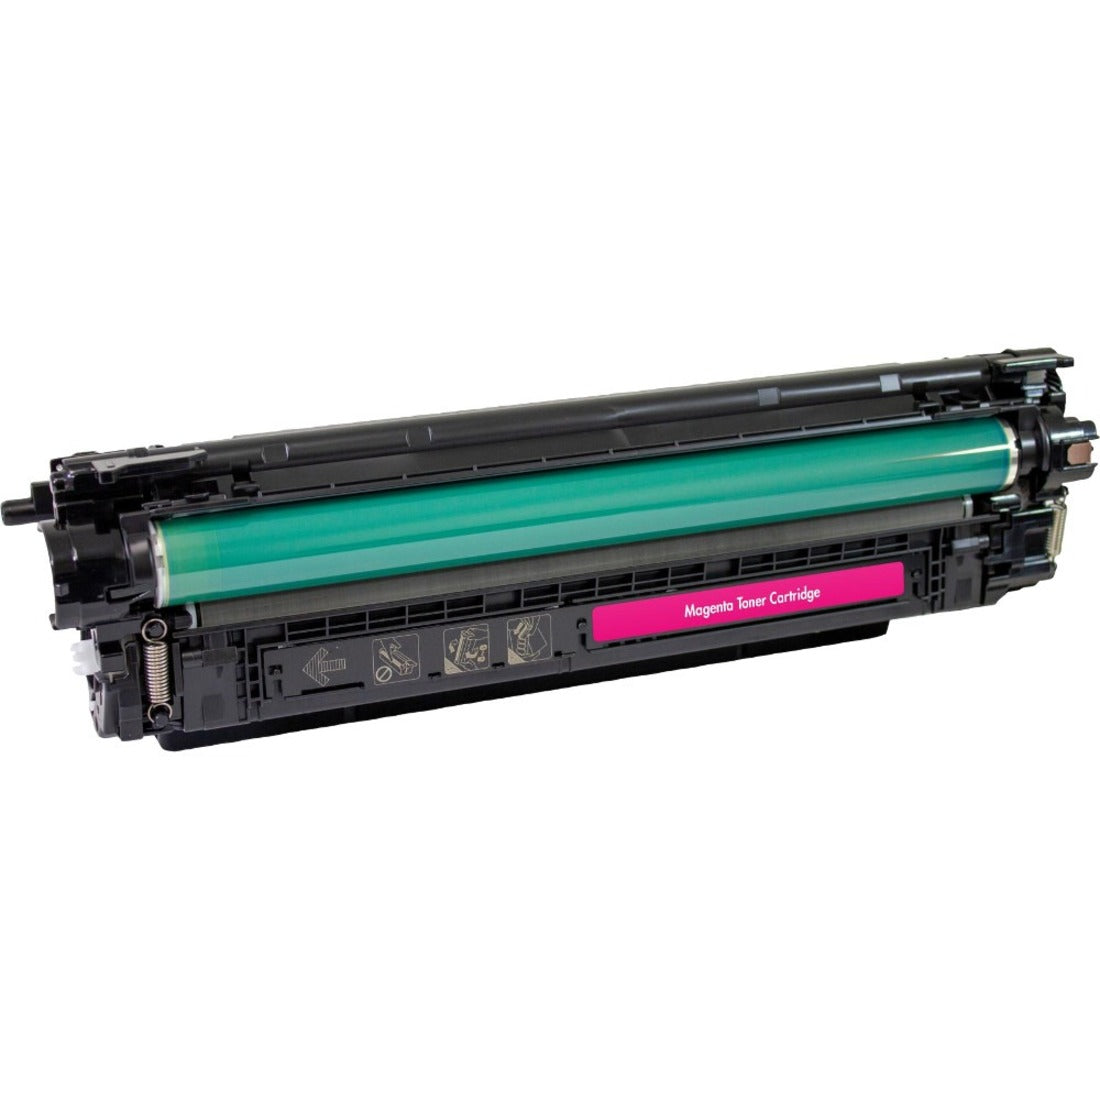 Clover Technologies 200943P Toner Cartridge, High Yield, Magenta, Compatible with HP Color LaserJet Printers